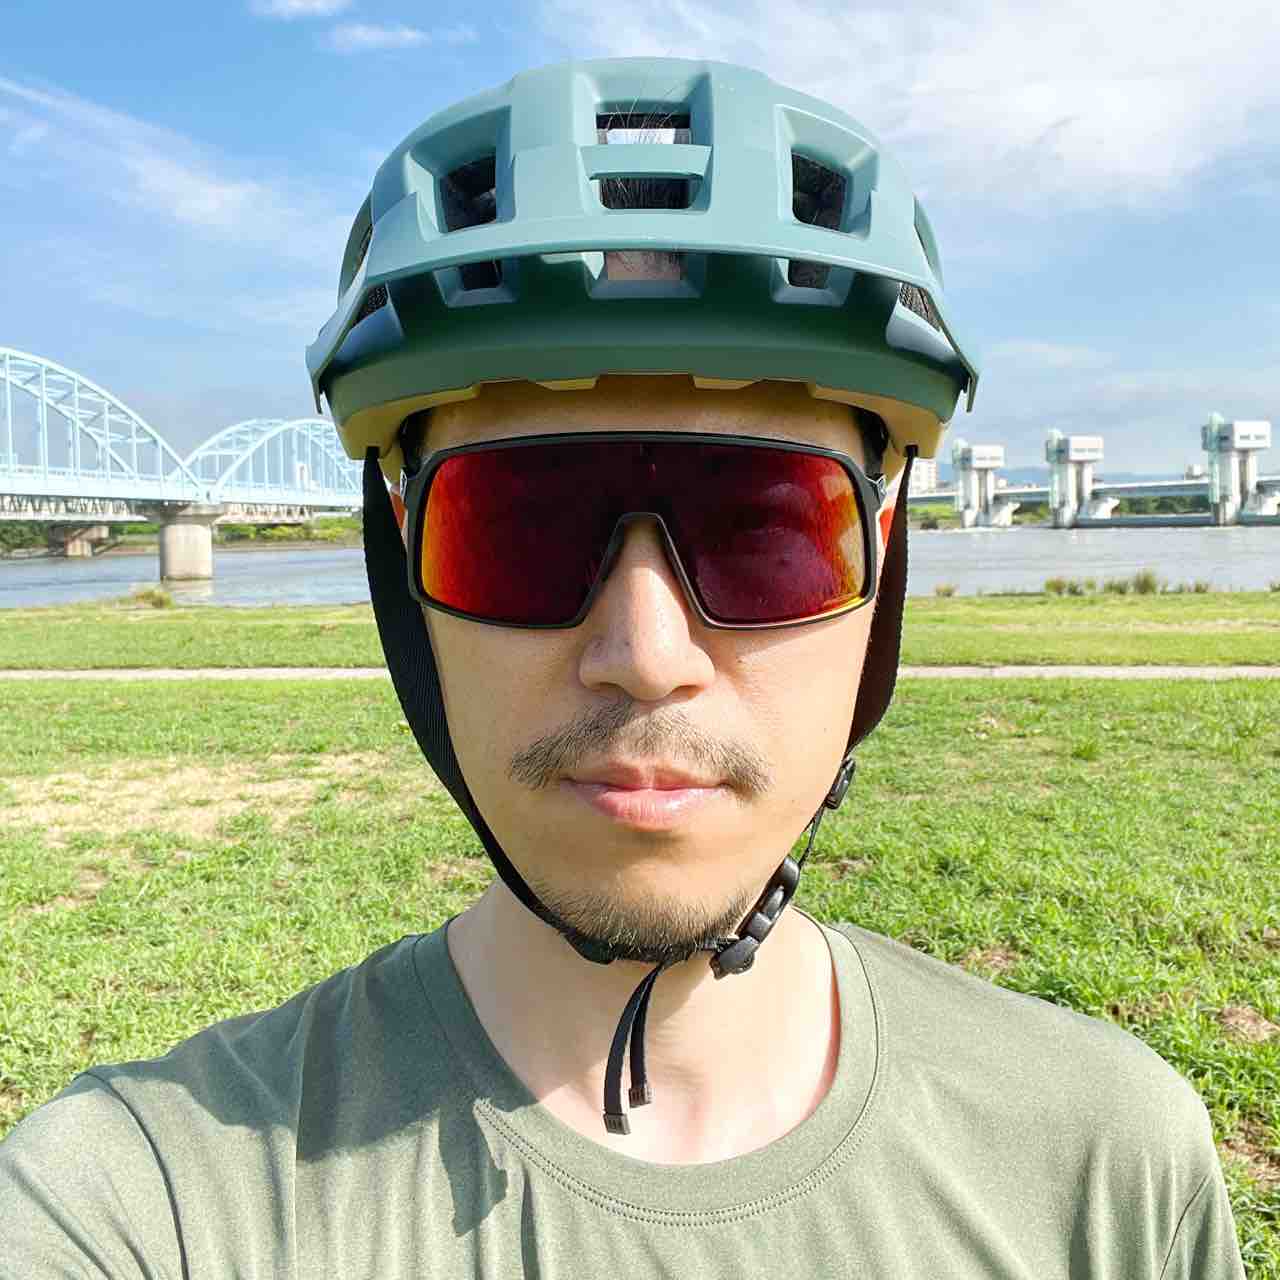 Oakley Sutro Asian Fit Overview